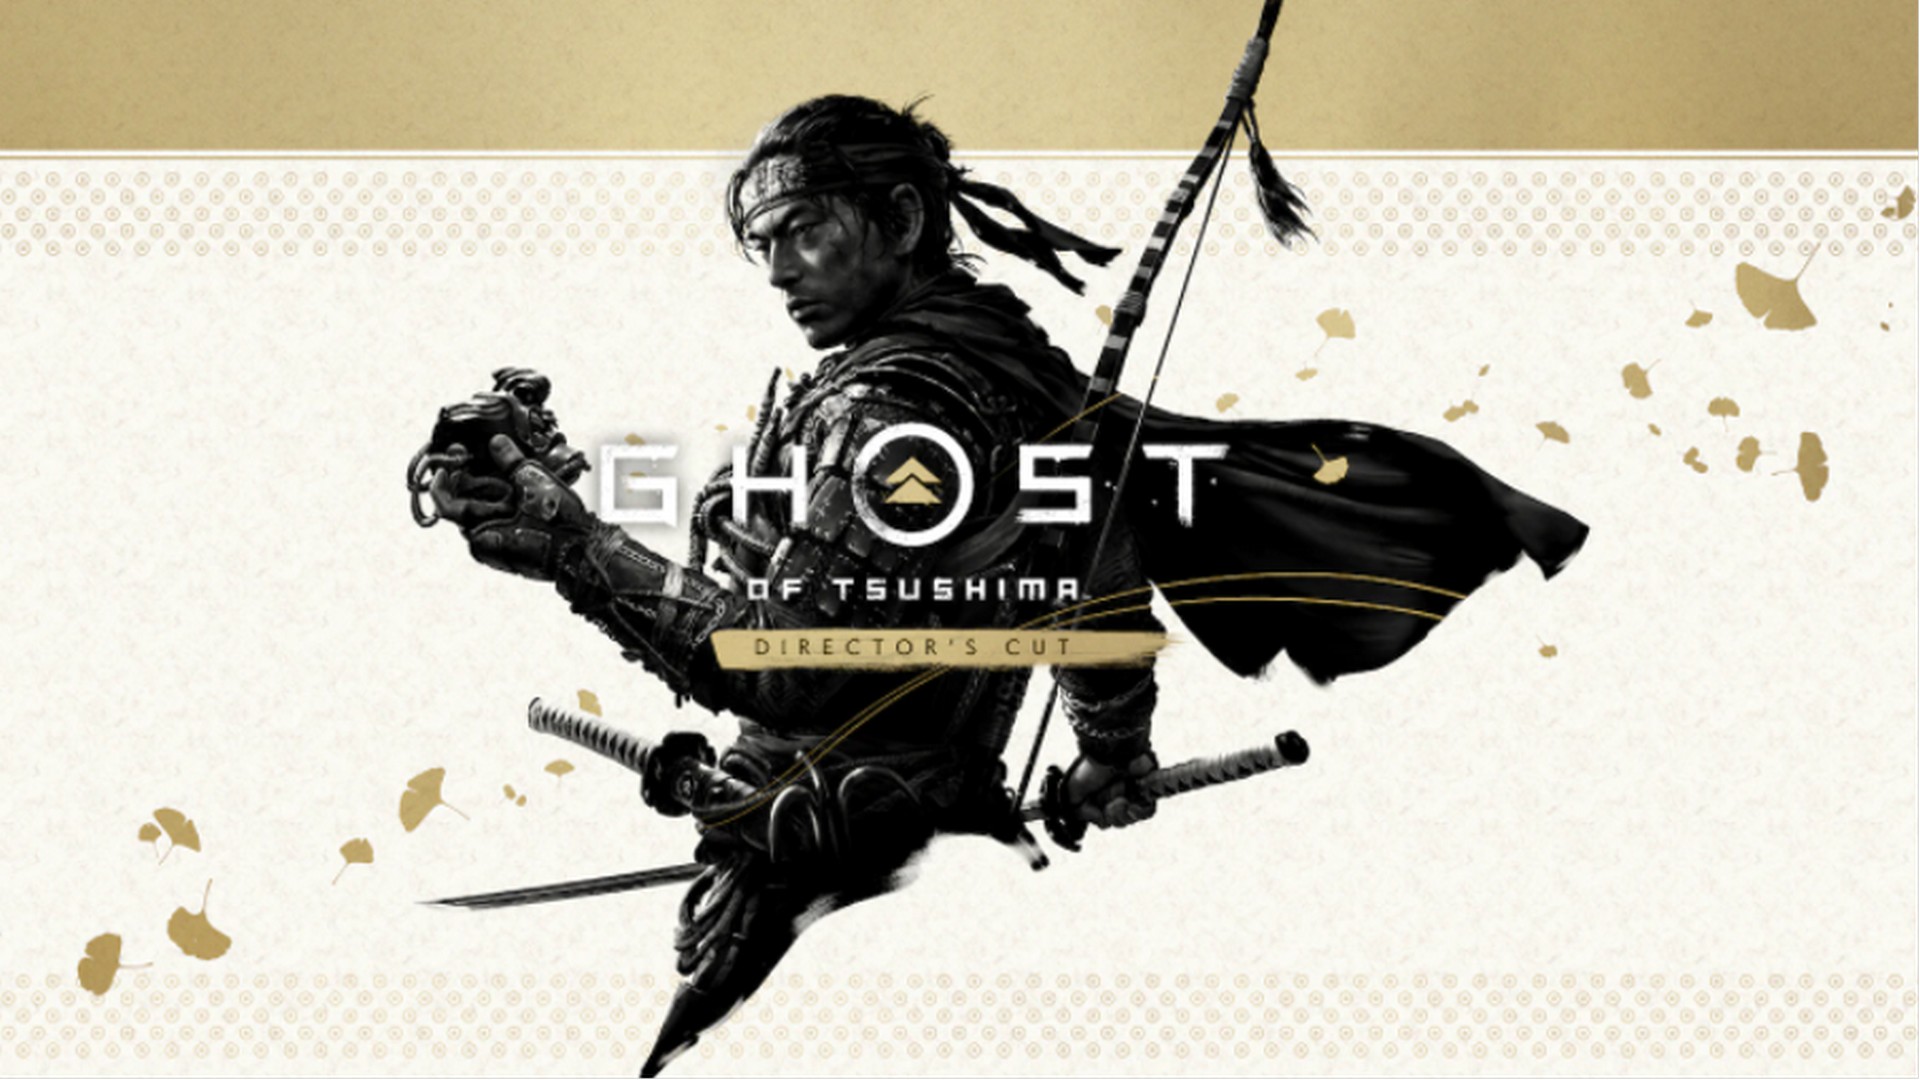 Ghost Of Tsushima Director’s Cut Launches Today On Playstation 5 & Playstation 4 Consoles